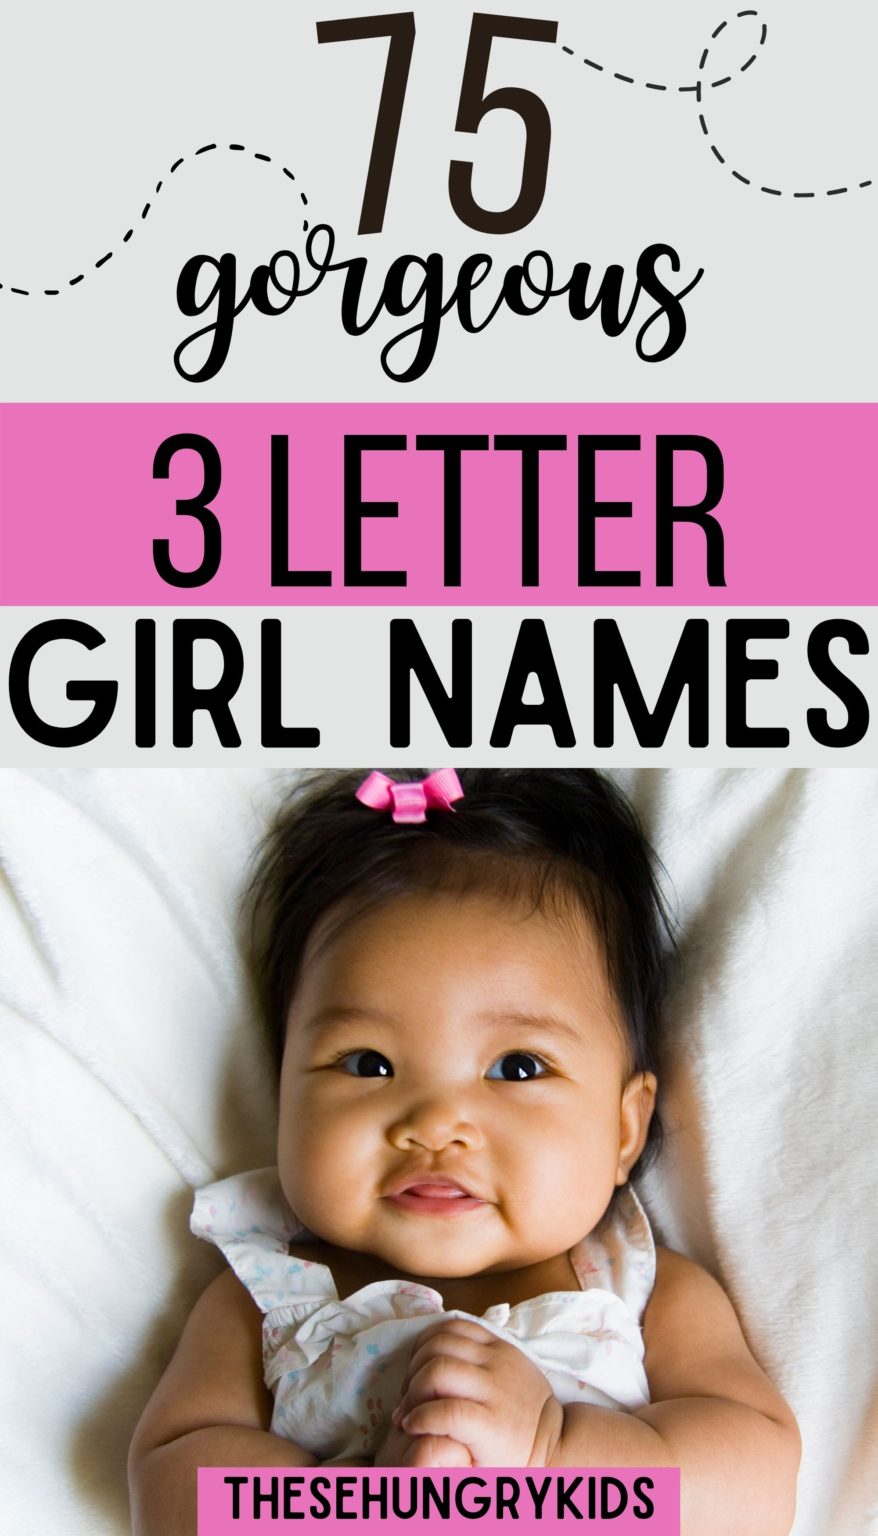 75-gorgeous-3-letter-girl-names-these-hungry-kids